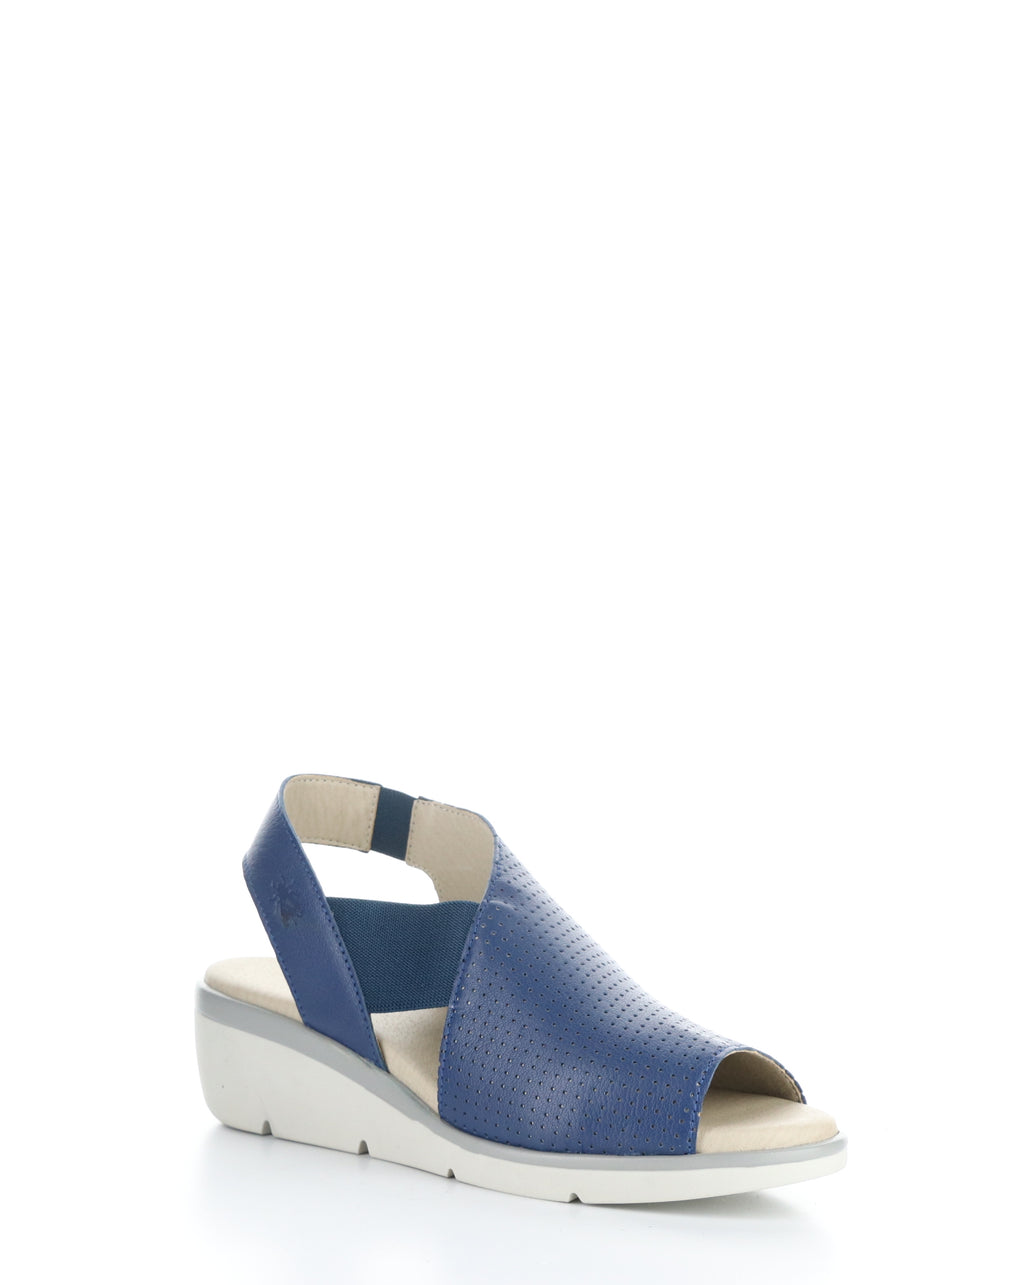 Fly London "Nisi" Blue perf low wedge sandal